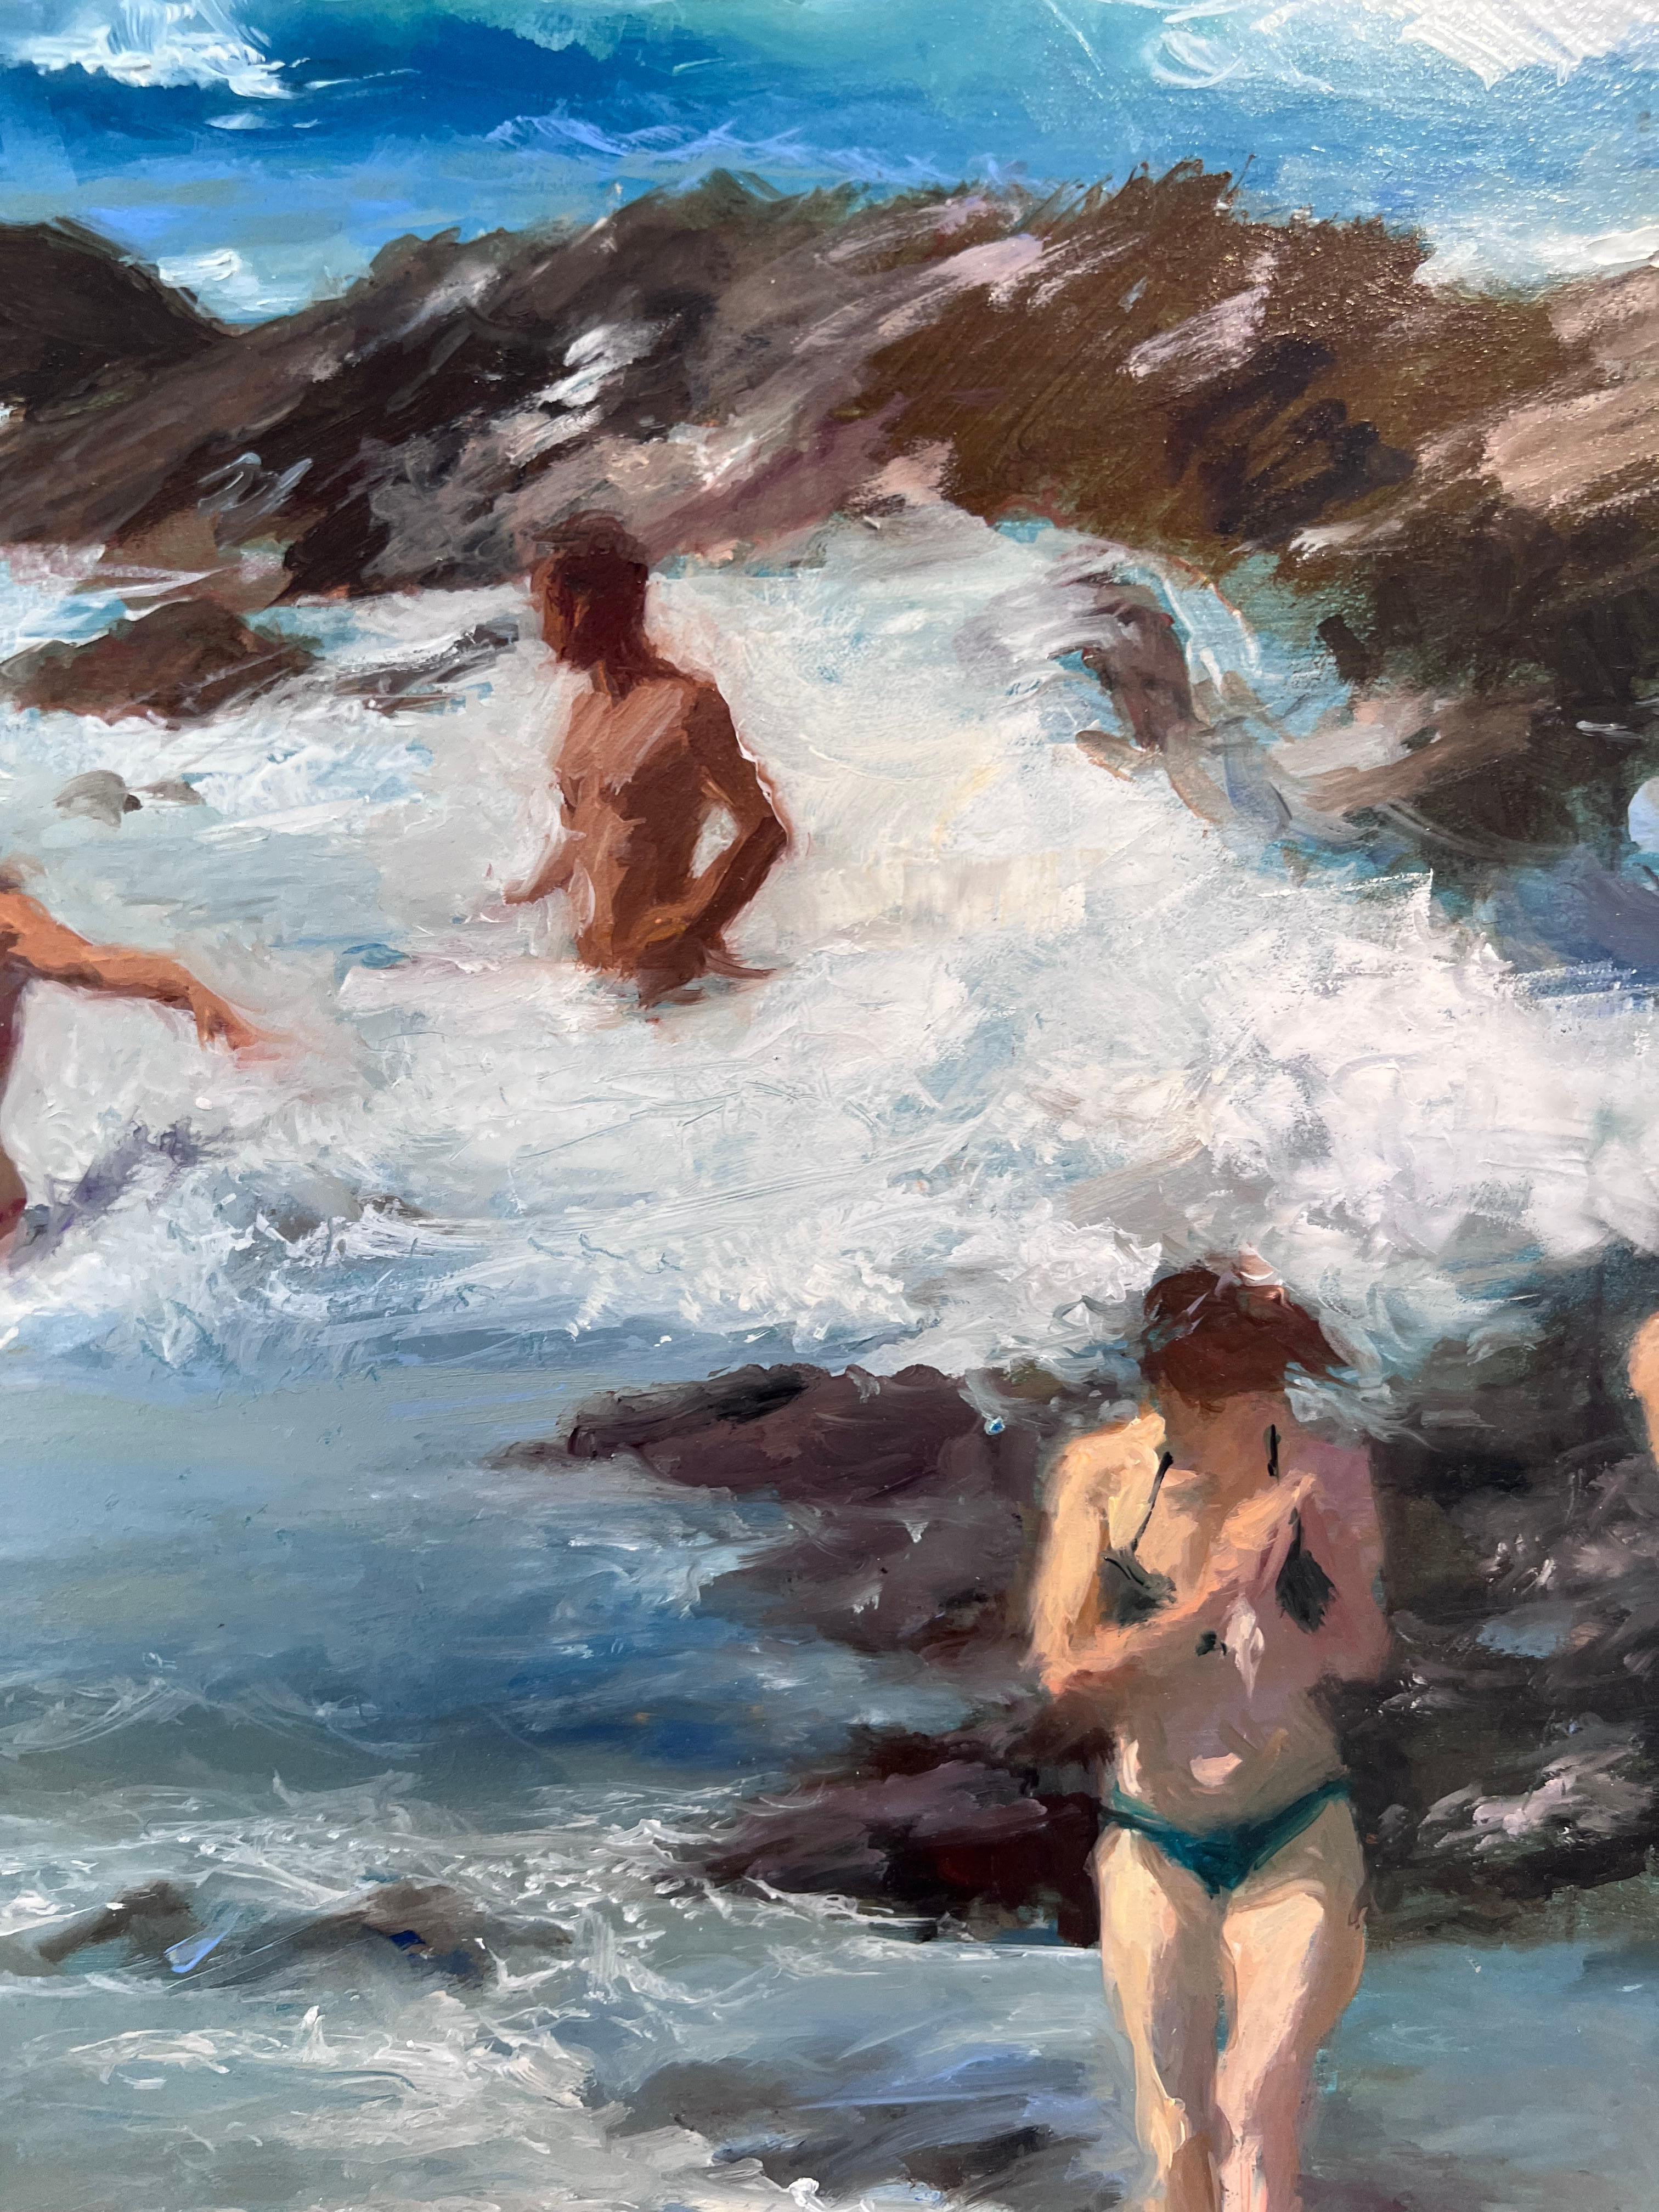 Breaking Surf-original contemporary impressionism figurative seascape painting - Painting by Michael Alford